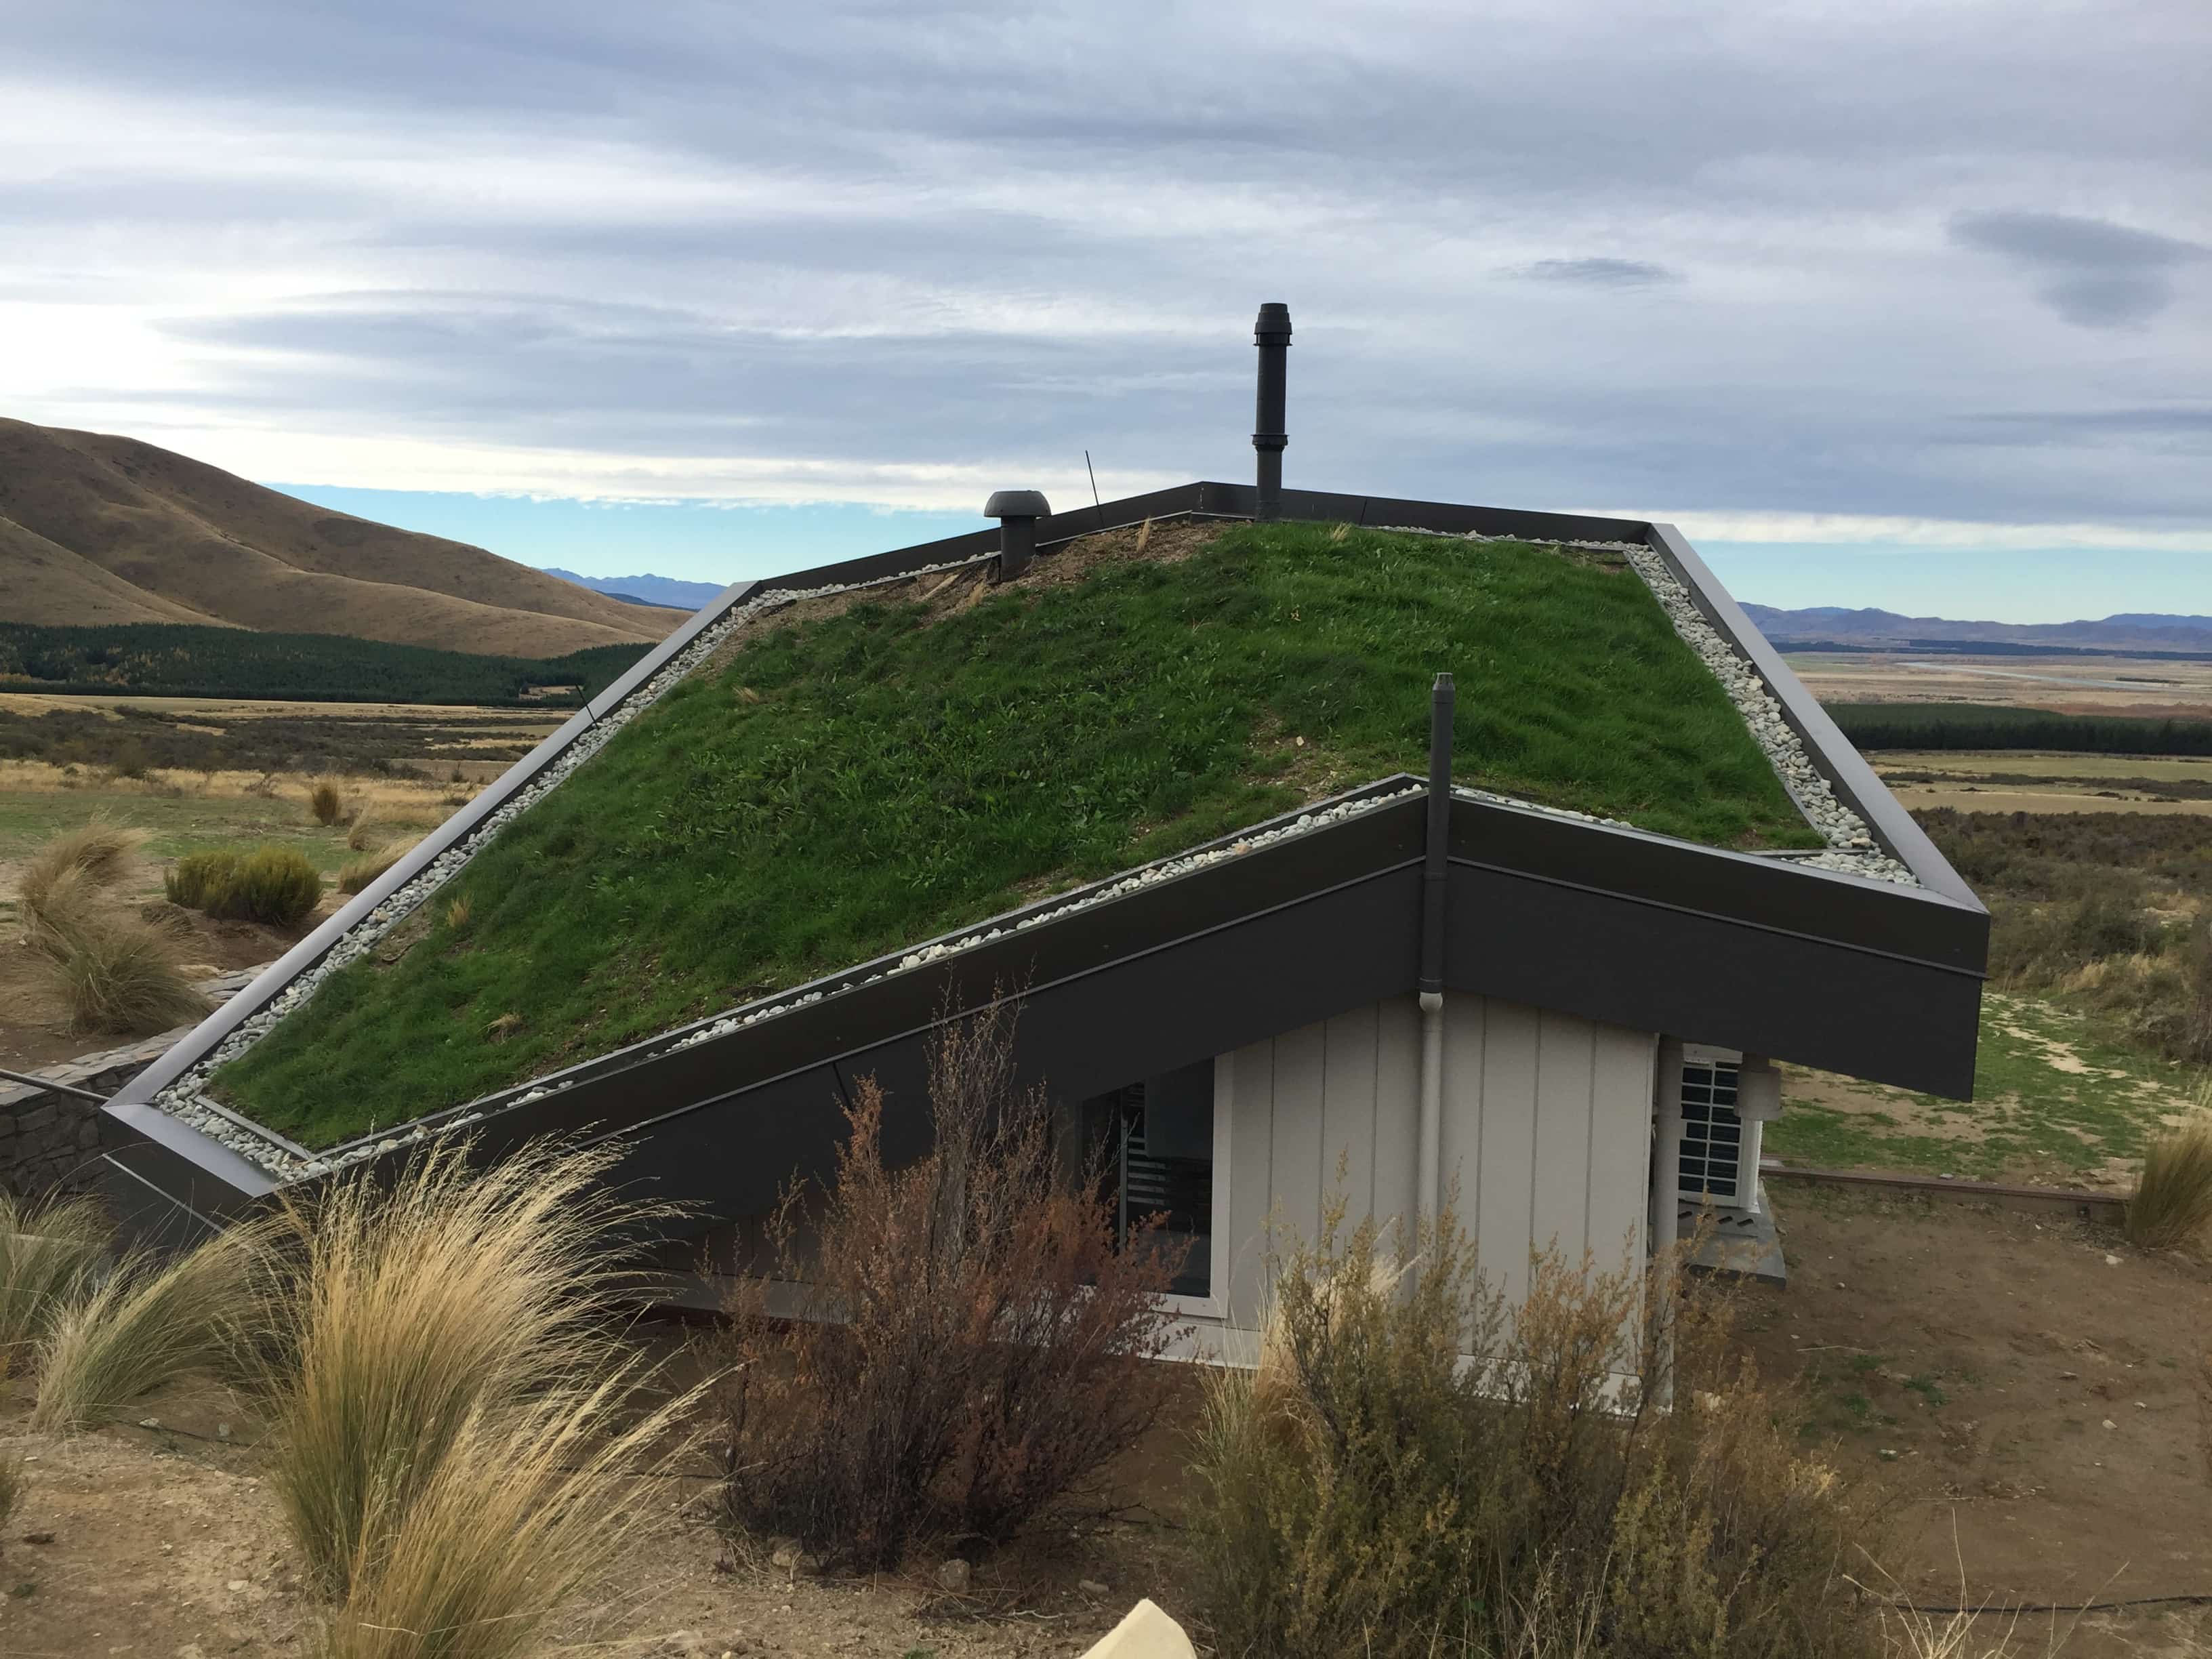  The grass roof provides extra insulation and sound proofing